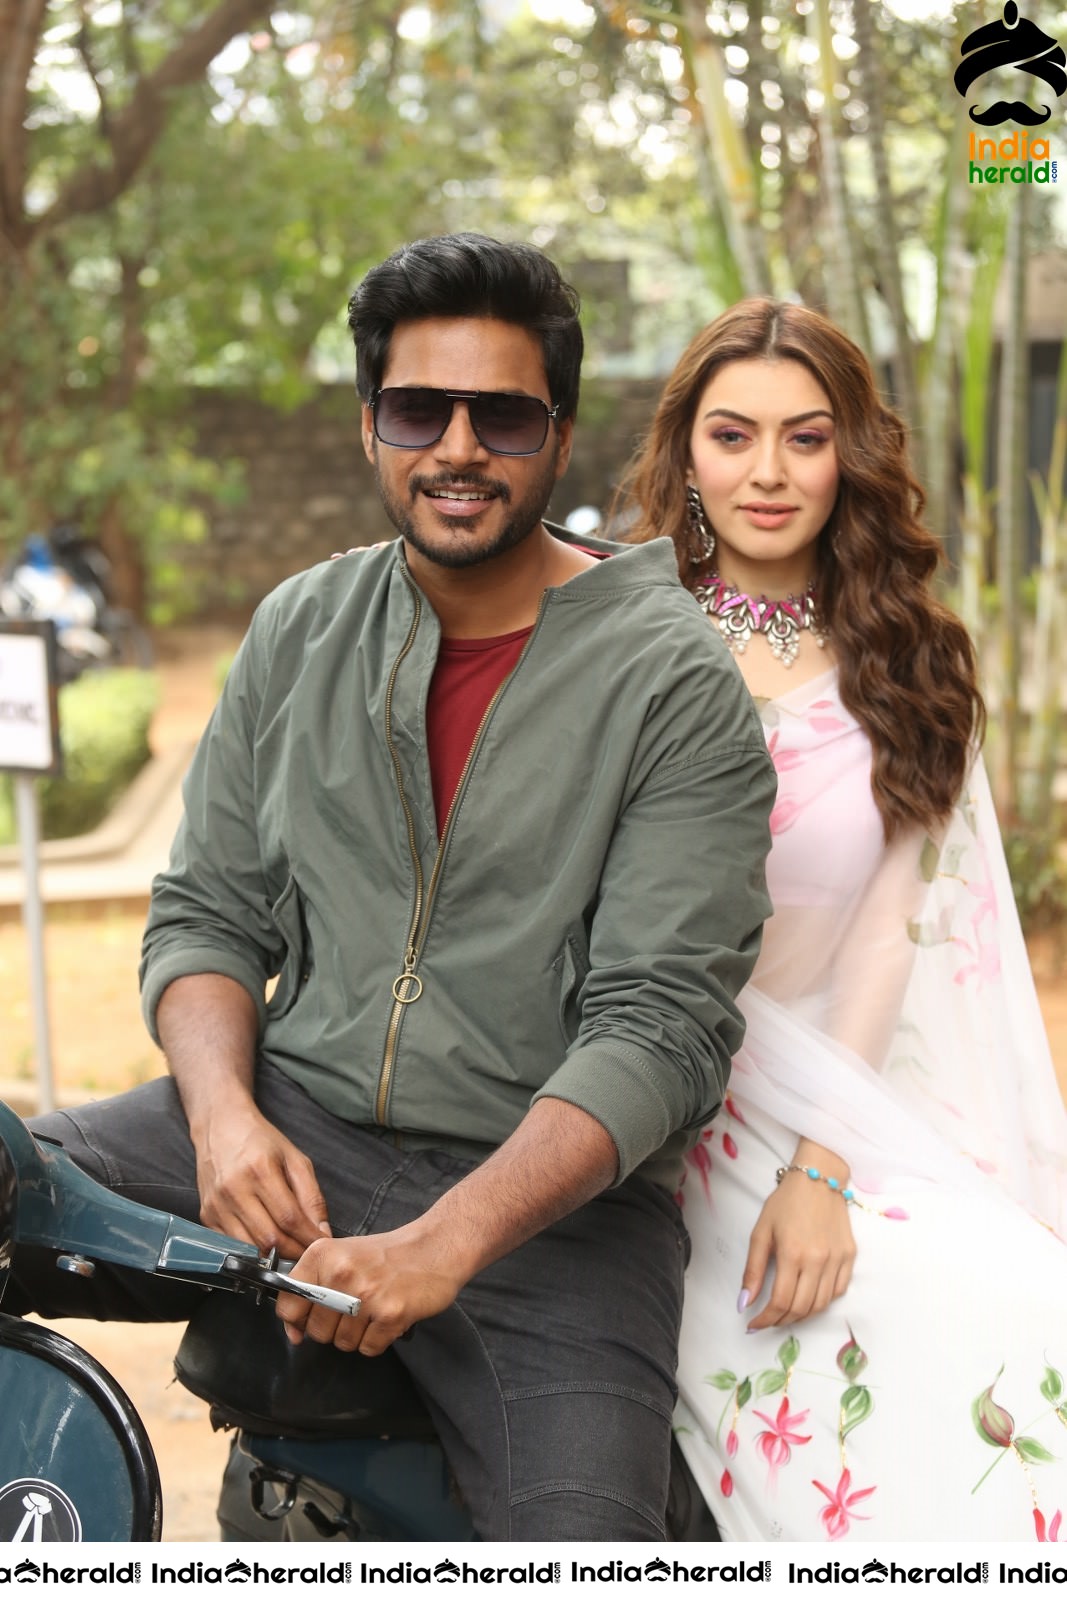 Actor Sundeep Kishan takes Photos along with Hansika sitting behind him in a Scooter Set 2